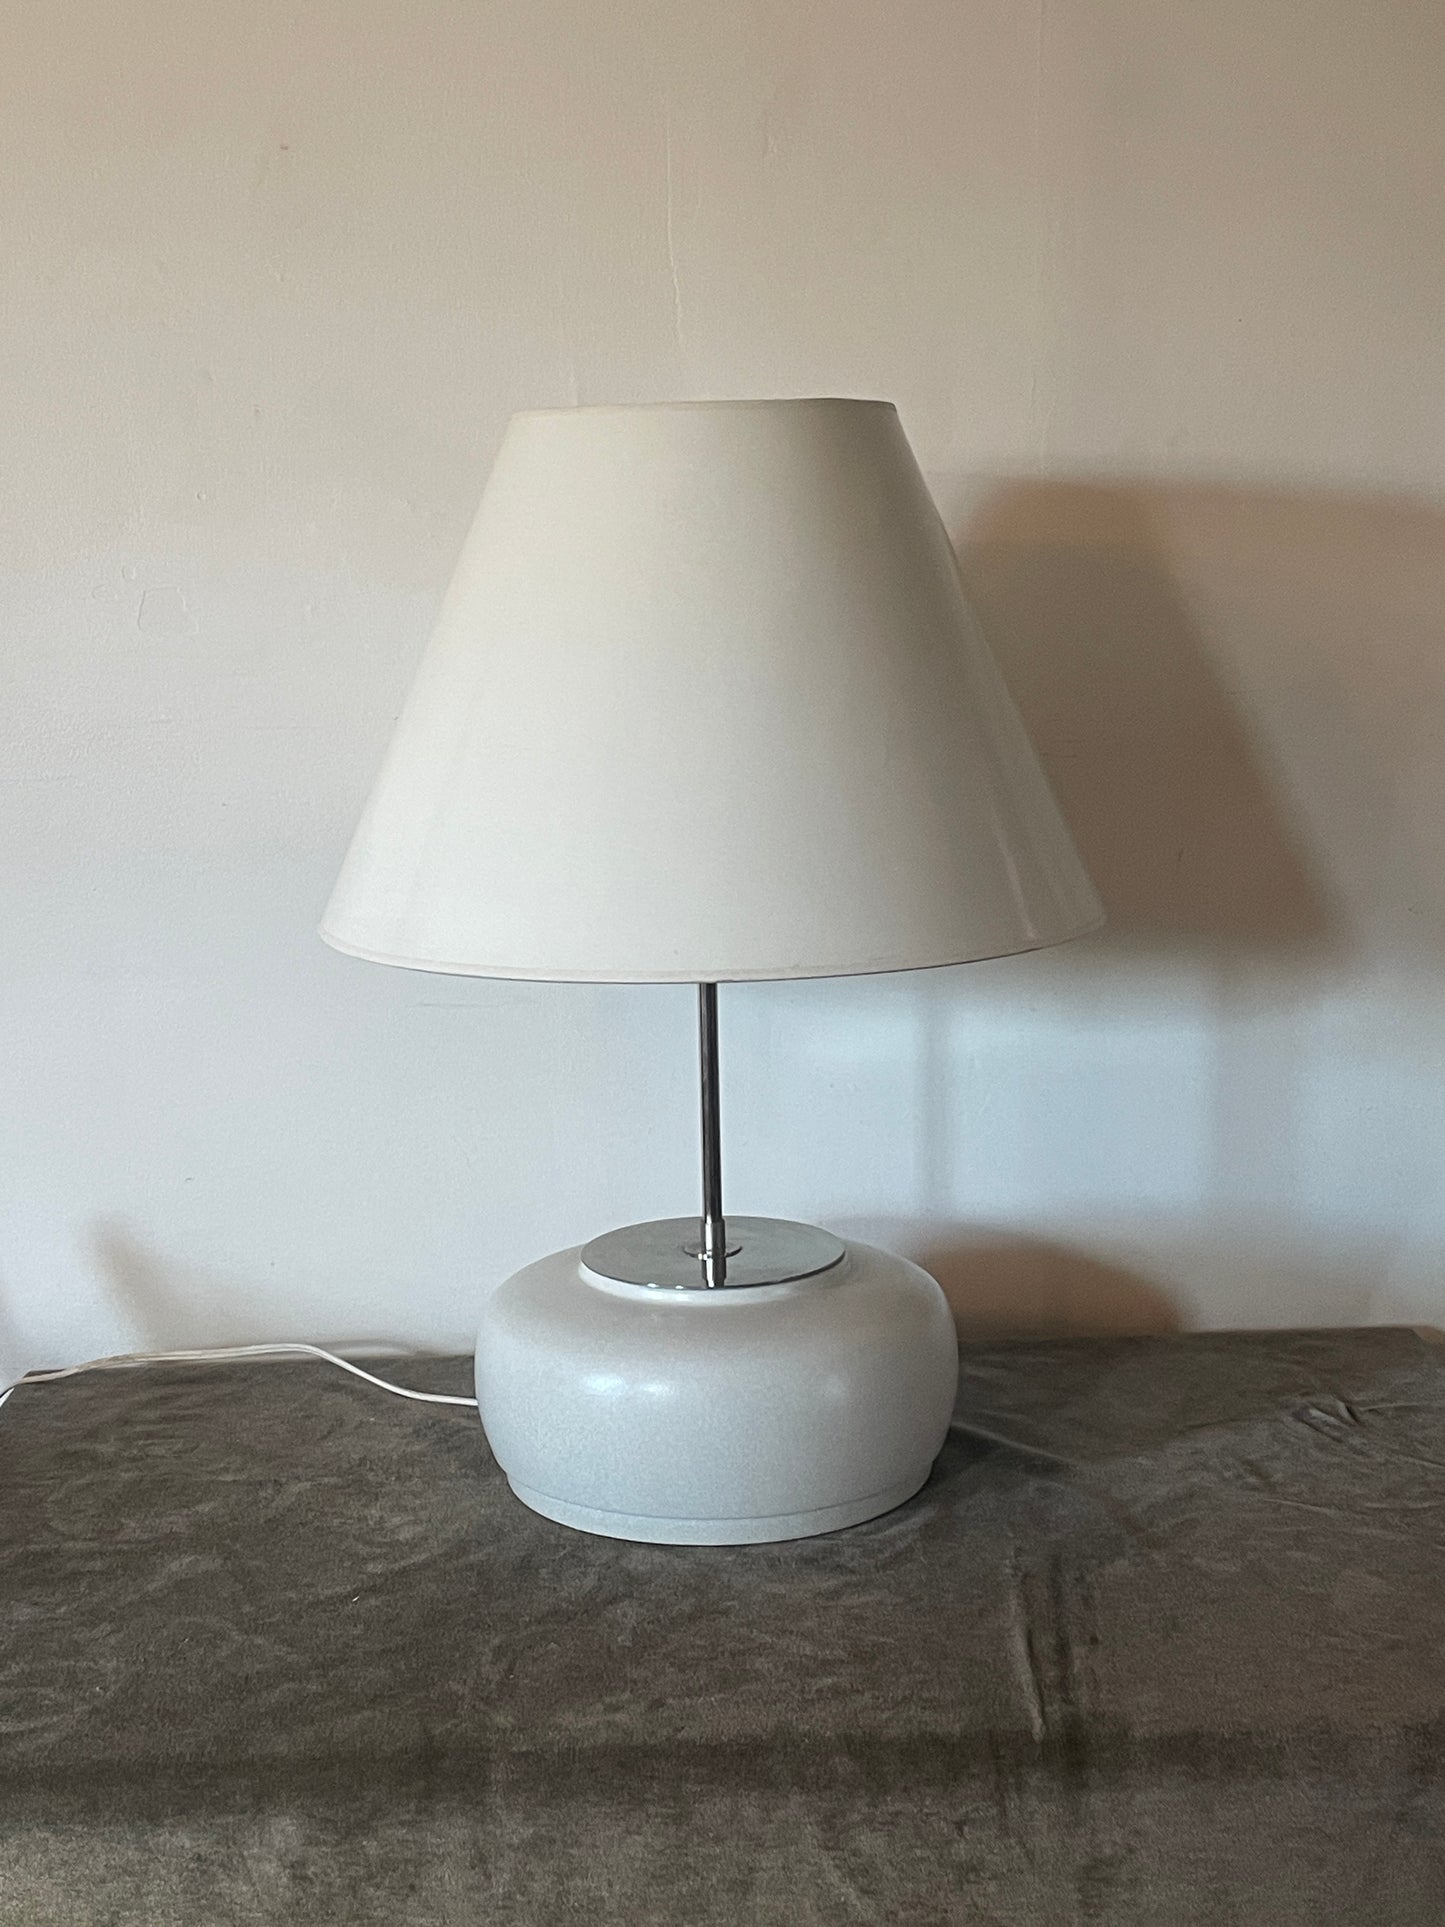 Thomas O’brien Vintage Modern Collection White Speckled Grey Ceramic Pebble Lamp